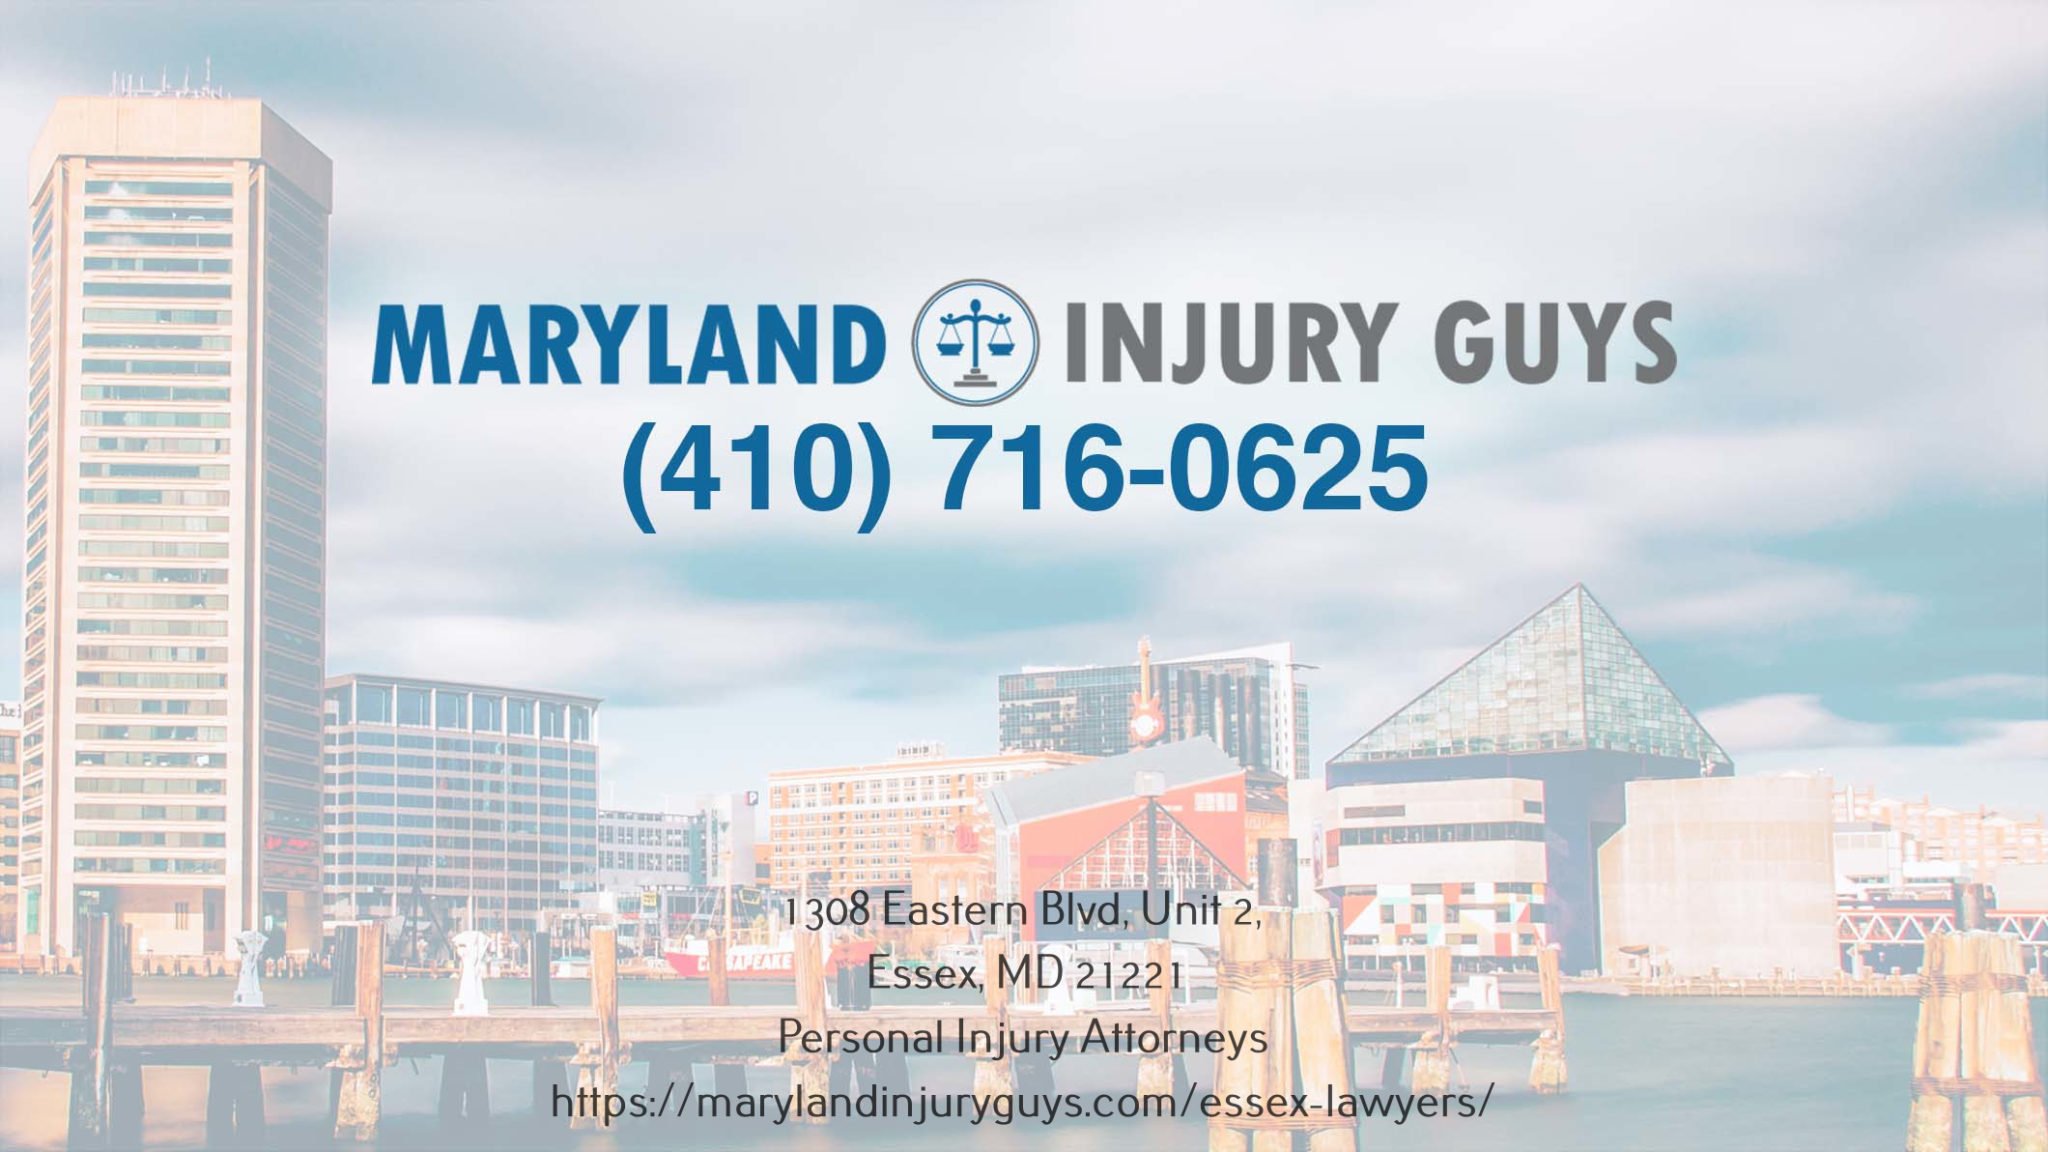 Get Legal Representation For Cerebral Palsy Claims With Essex, MD Injury Lawyer